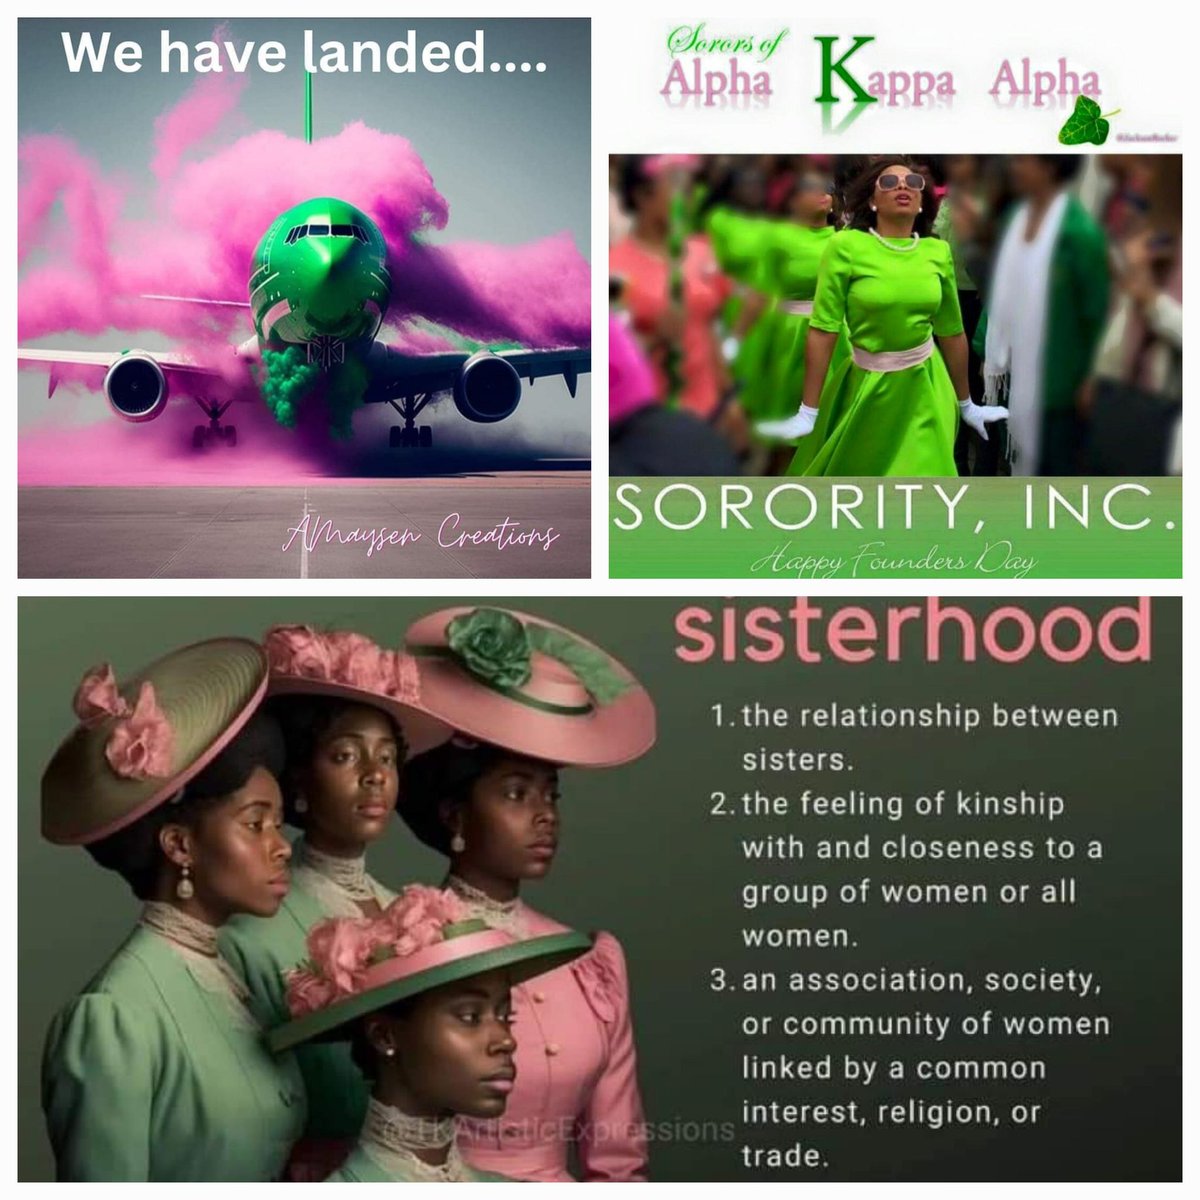 Happy Founders' Day to my OH SO awesome sorors of Alpha Kappa Alpha Sorority, Incorporated 💗💚💗💚. We look mighty good for 115 years 😉.

**Silver Star loading in T - 44 days 🥰🥰**
#AKA1908 #SweetMuPi #EthelsDaughters #ByMeritandCulture #WeHelpEachOther